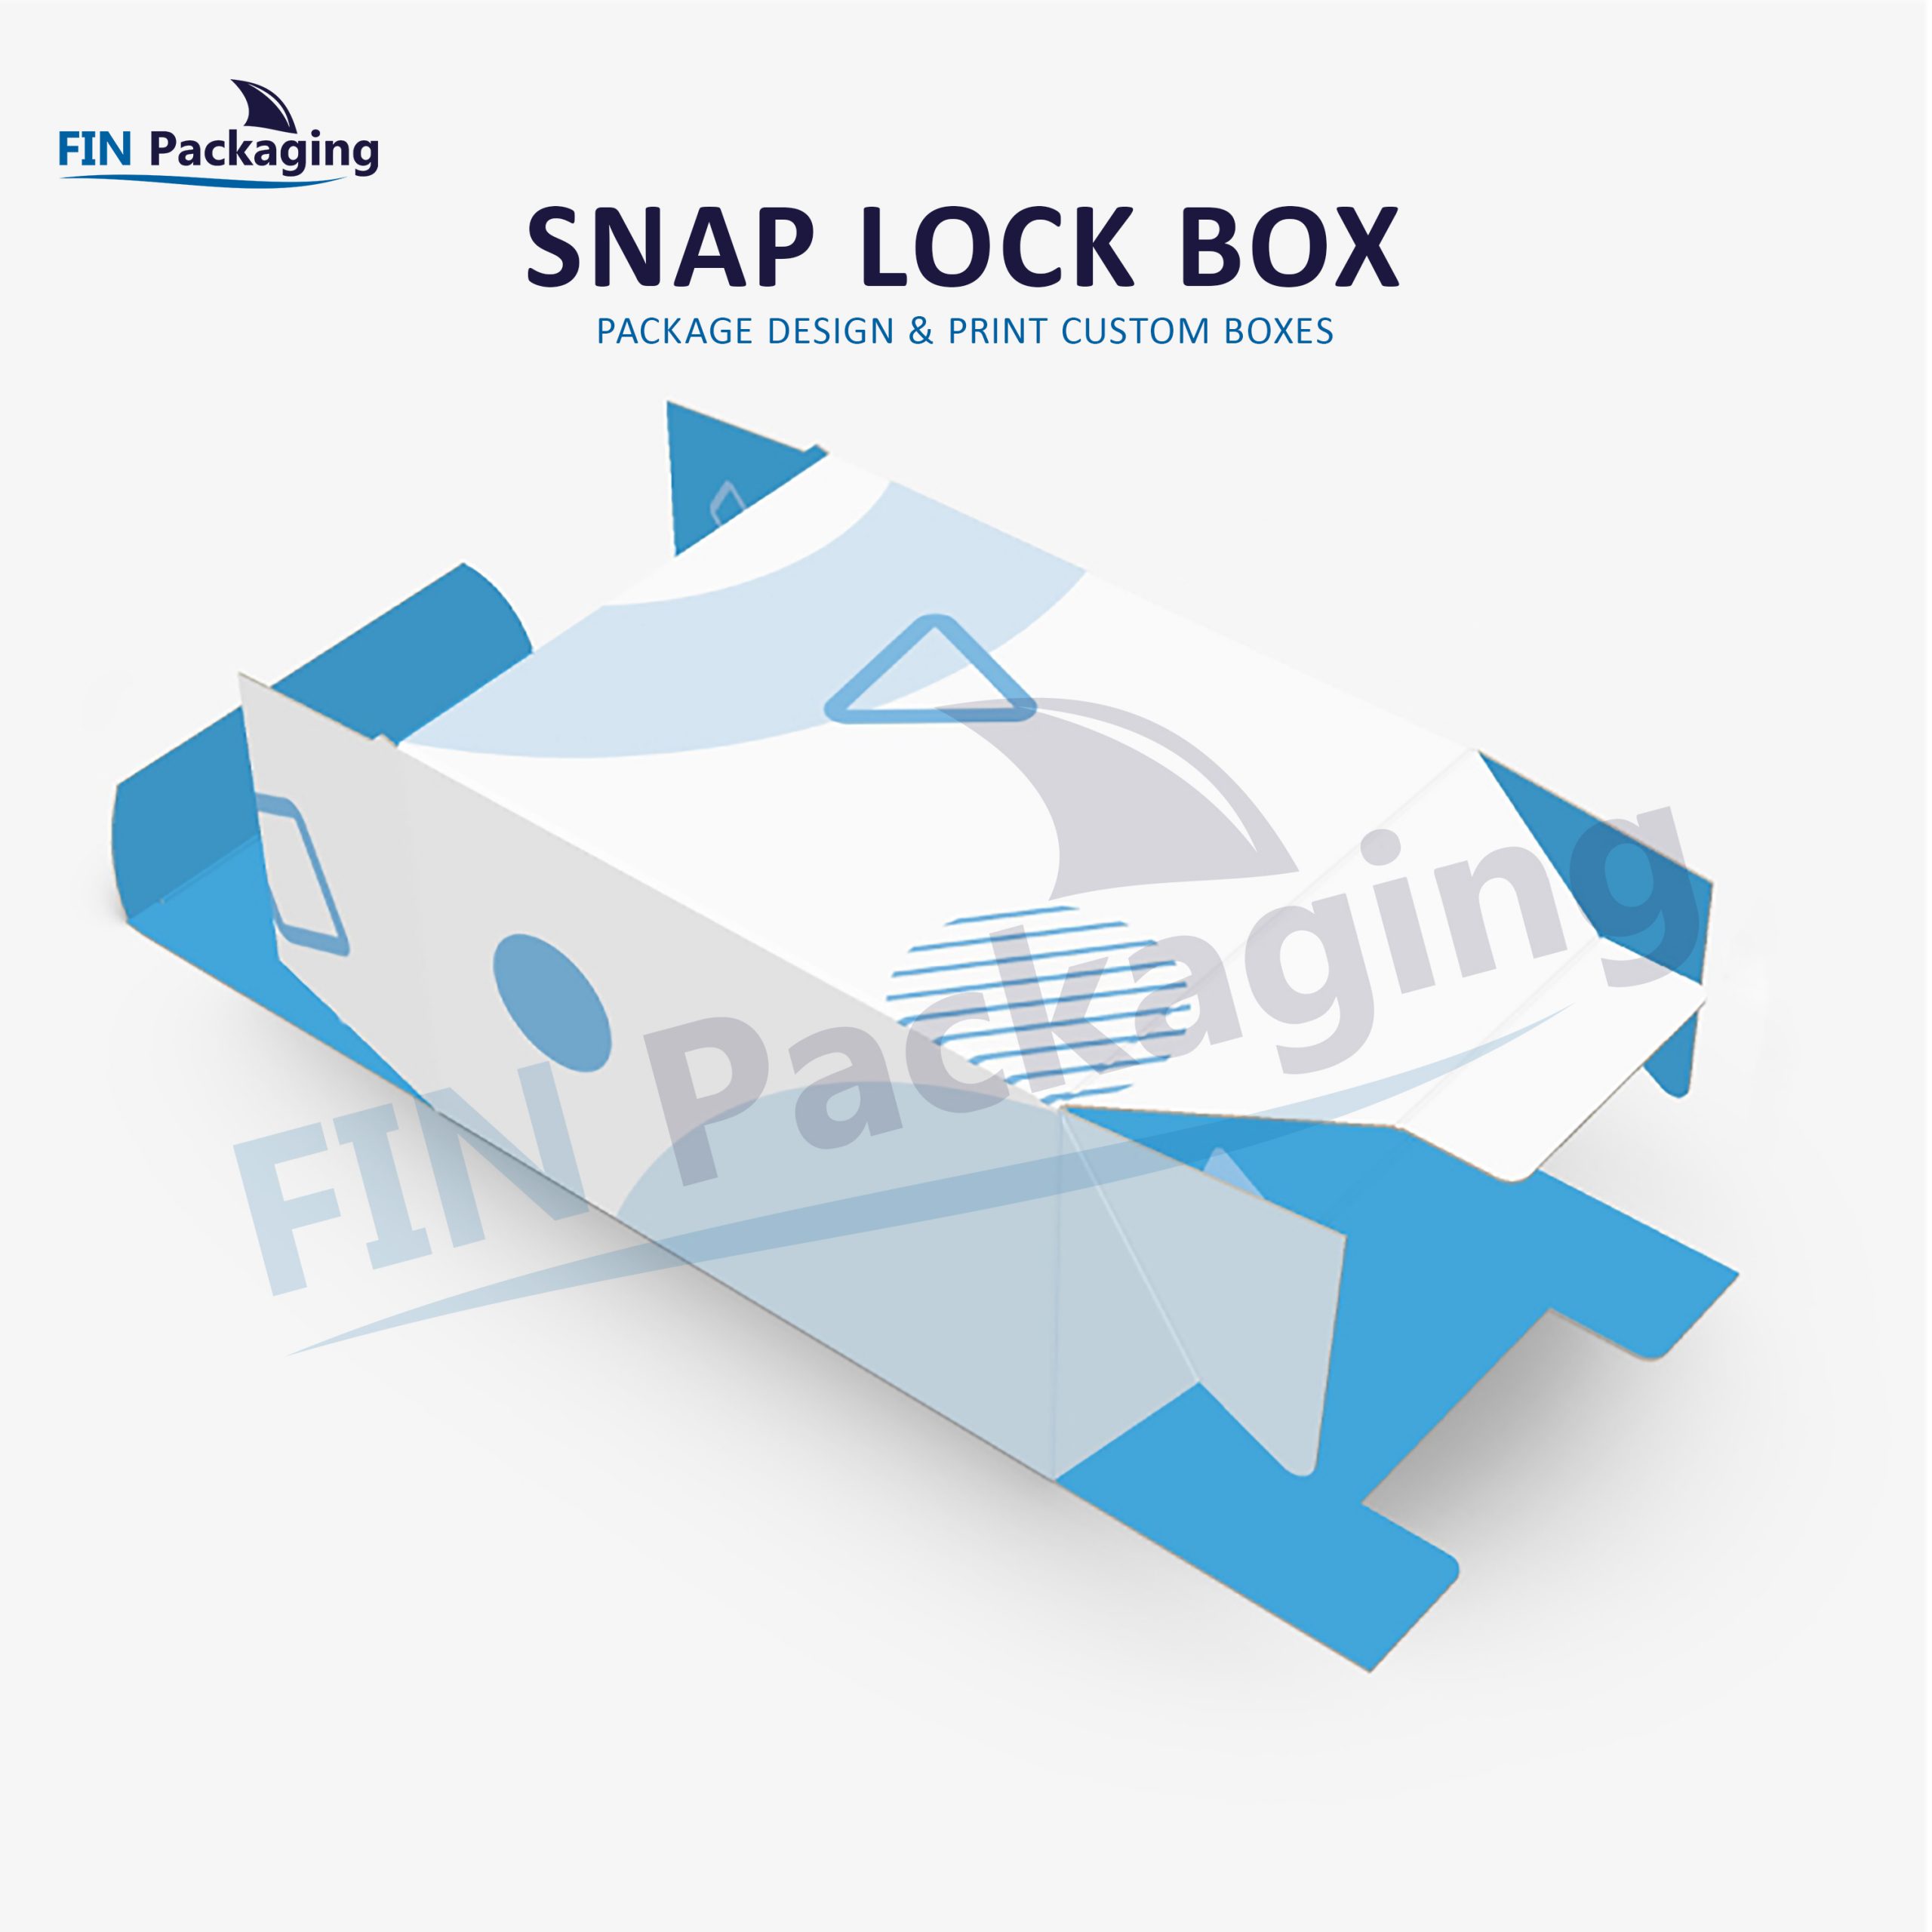 What's the Difference Between Snap Lock Boxes and Auto Lock Bottom Boxes?